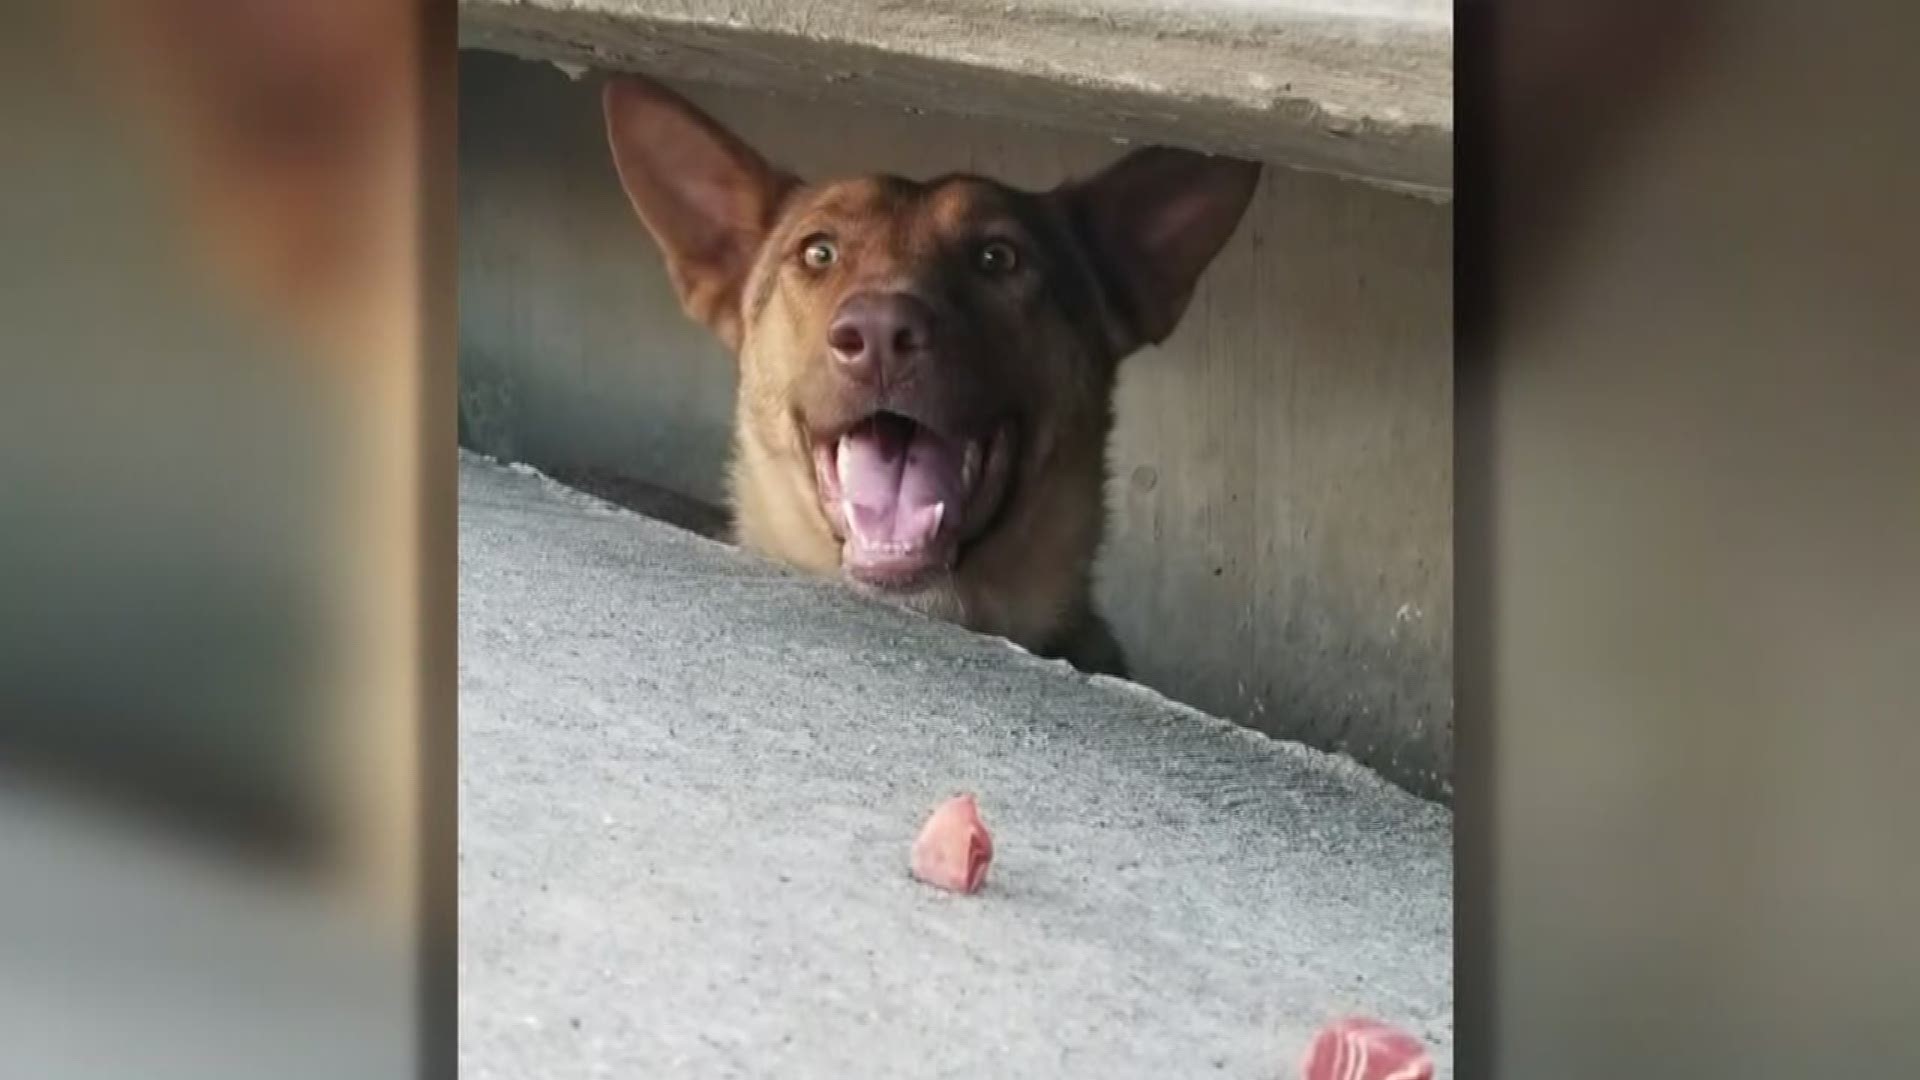 Residents care for dog living in Grand Prairie storm drain